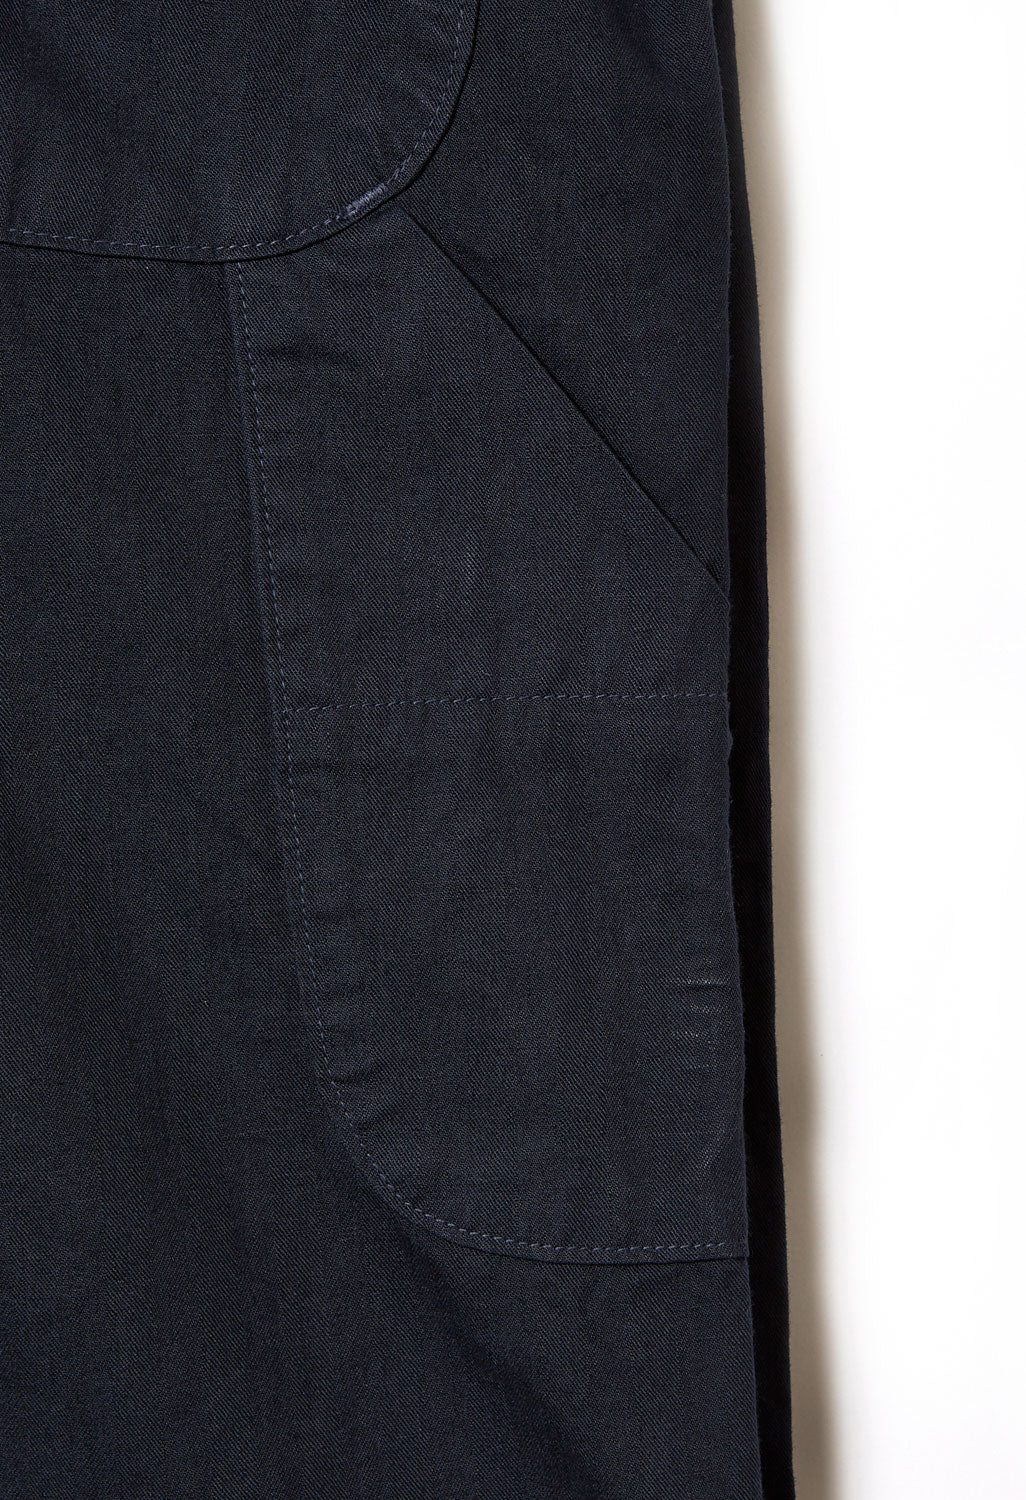 orSlow French Work Pants – Outsiders Store UK